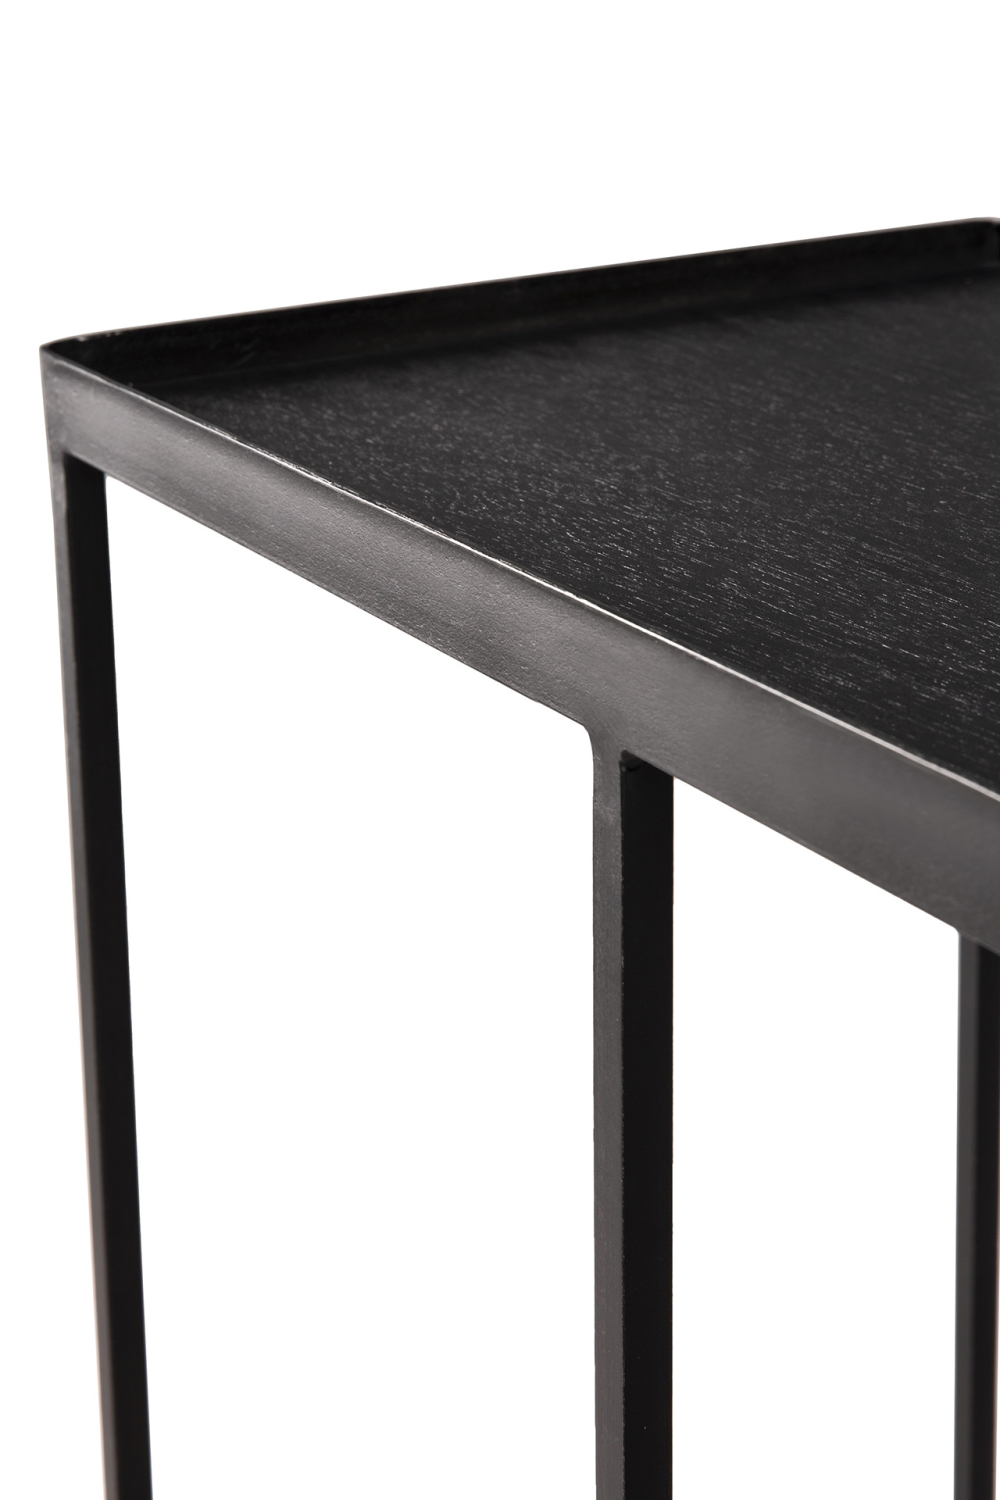 Black C-Shaped Side Table | Ethnicaft Tray | Ethnicraft